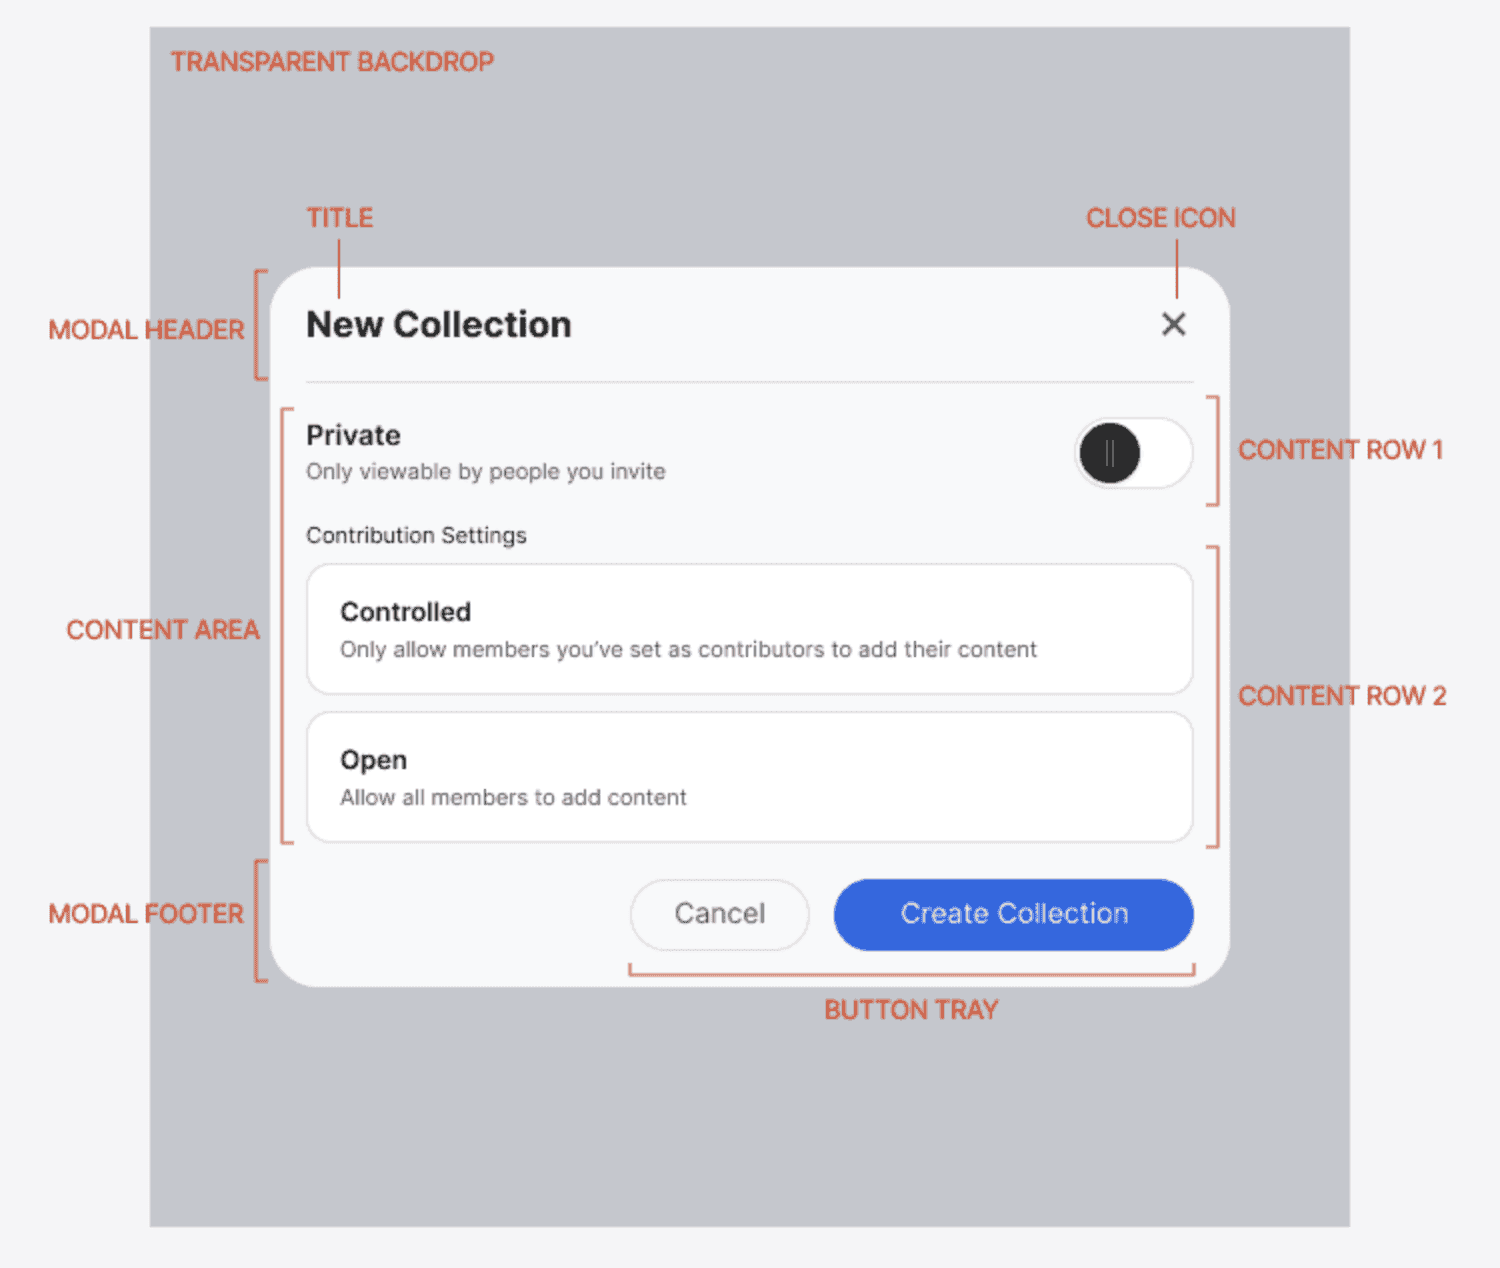 Anatomy of Modal component - [https://uxmovement.com/content/anatomy-of-an-optimally-designed-modal/](https://uxmovement.com/content/anatomy-of-an-optimally-designed-modal/)